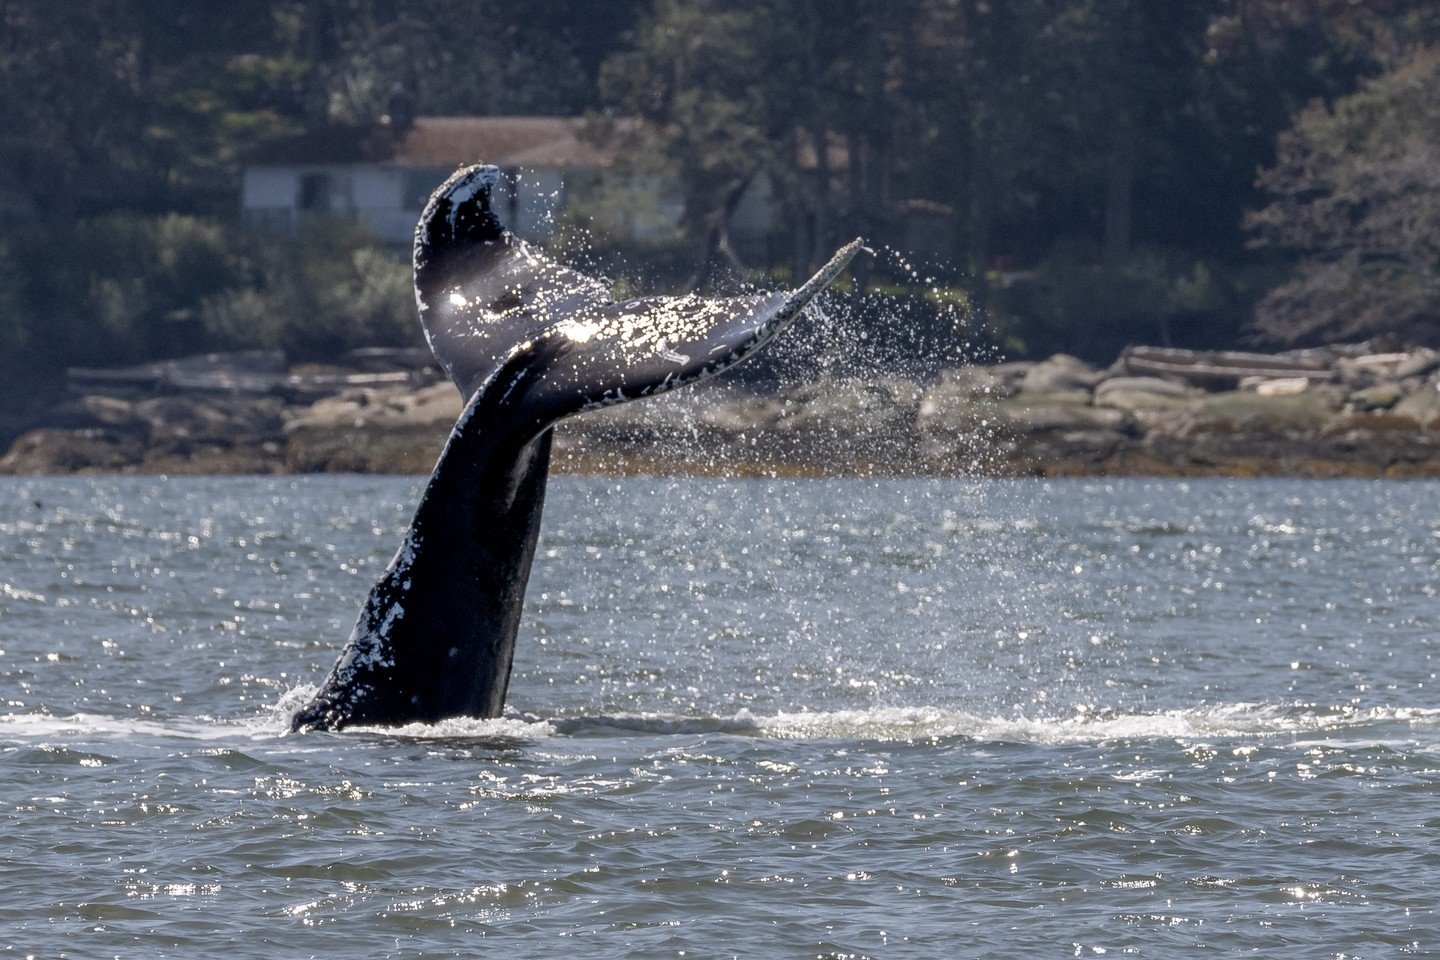 Did you know our first humpback of 2023 was on April 28th?

We sure blew that record out of the water with our February Humpback this year! 

The first humpback of 2023 was &quot;SEAK-UASE-HEV-20040715-1-016&quot;. Not a very easy name eh? 

She was 